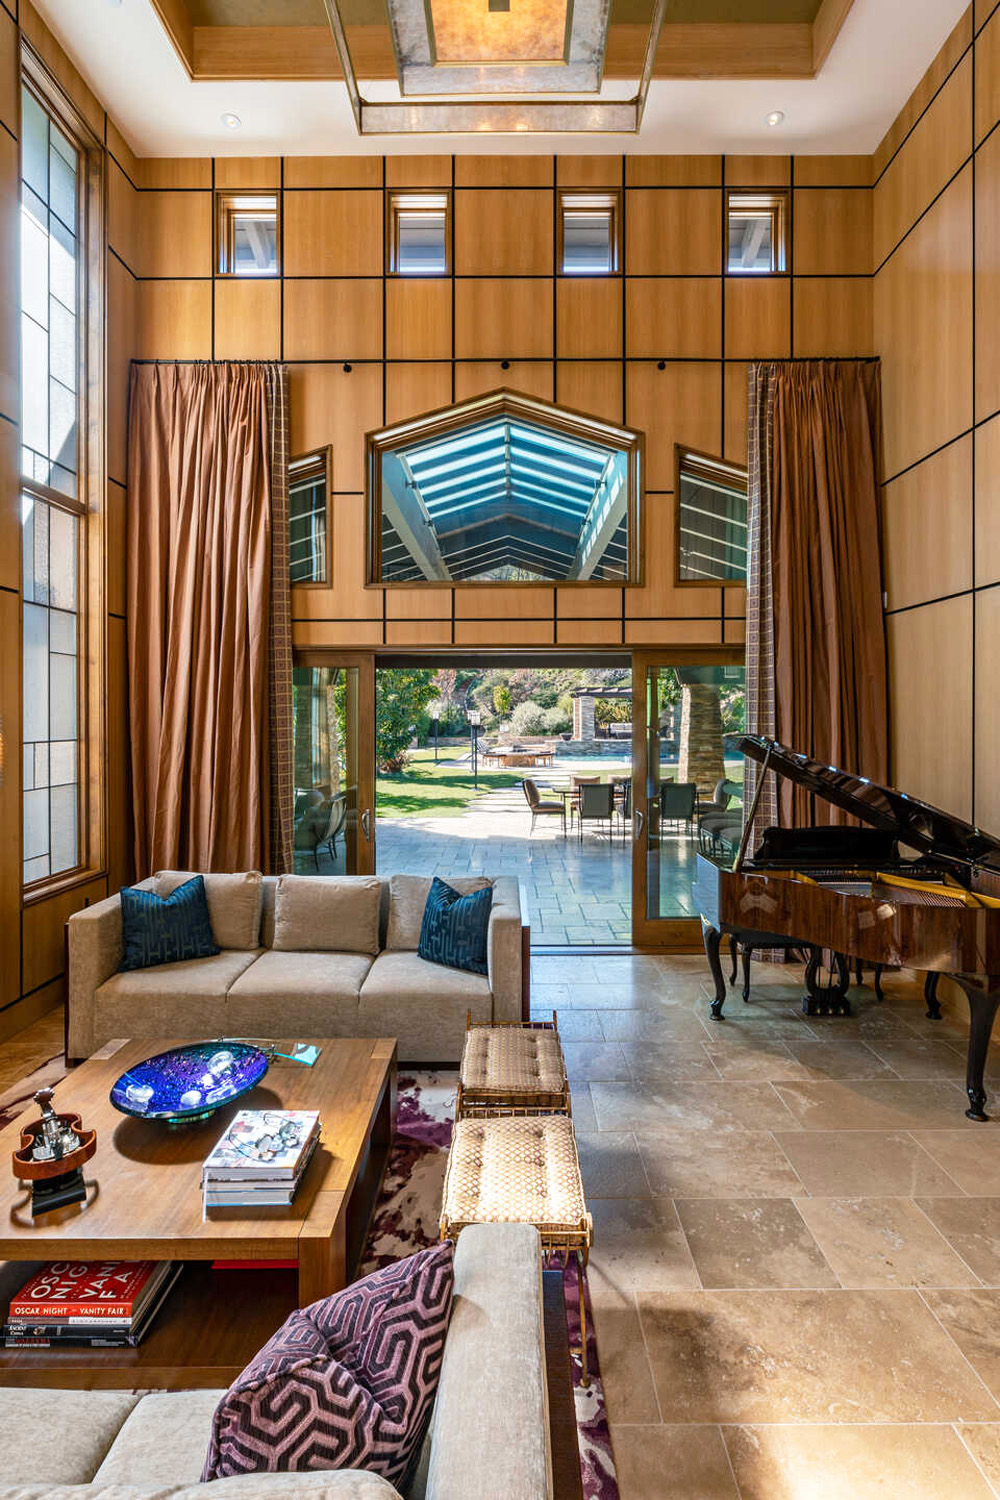 A living room space with sky-high ceilings and a majestic grand piano in the corner